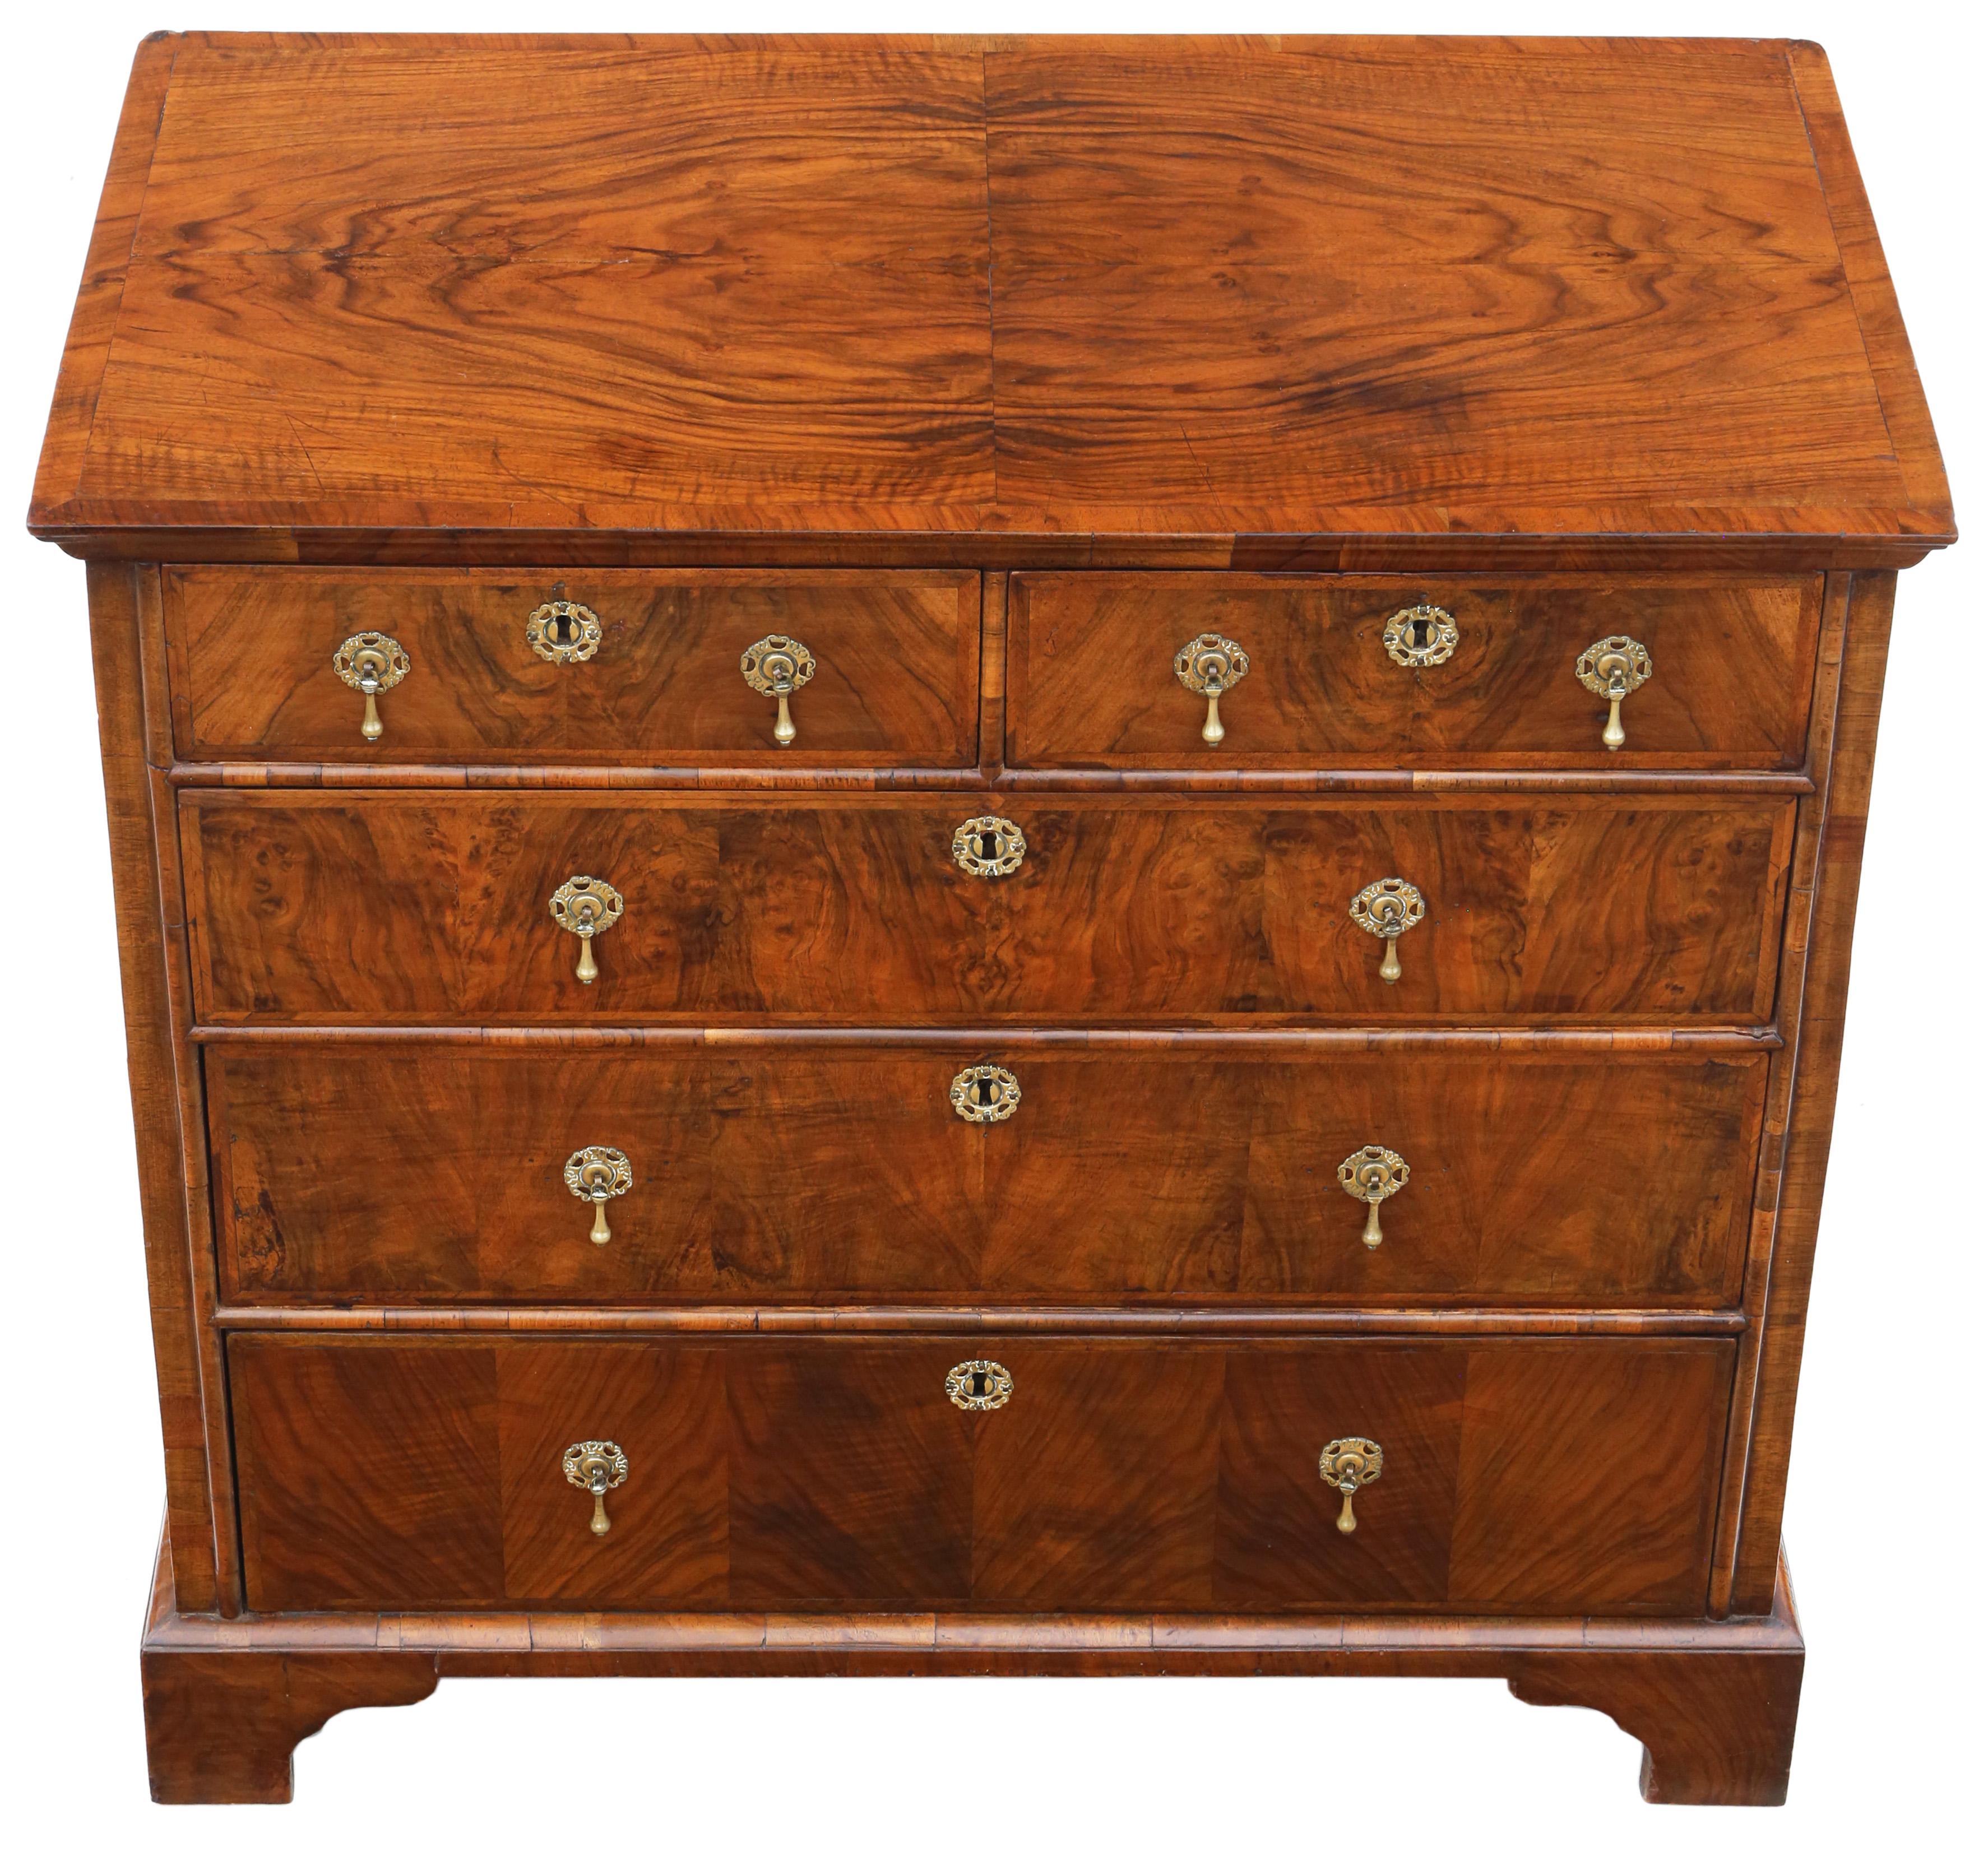 Antique fine quality 18th Century figured walnut chest of drawers.
This is a lovely chest, that has been restored historically to a good standard. Attractive burr walnut veneers to the front on an oak structure.
Solid strong and heavy.

No loose